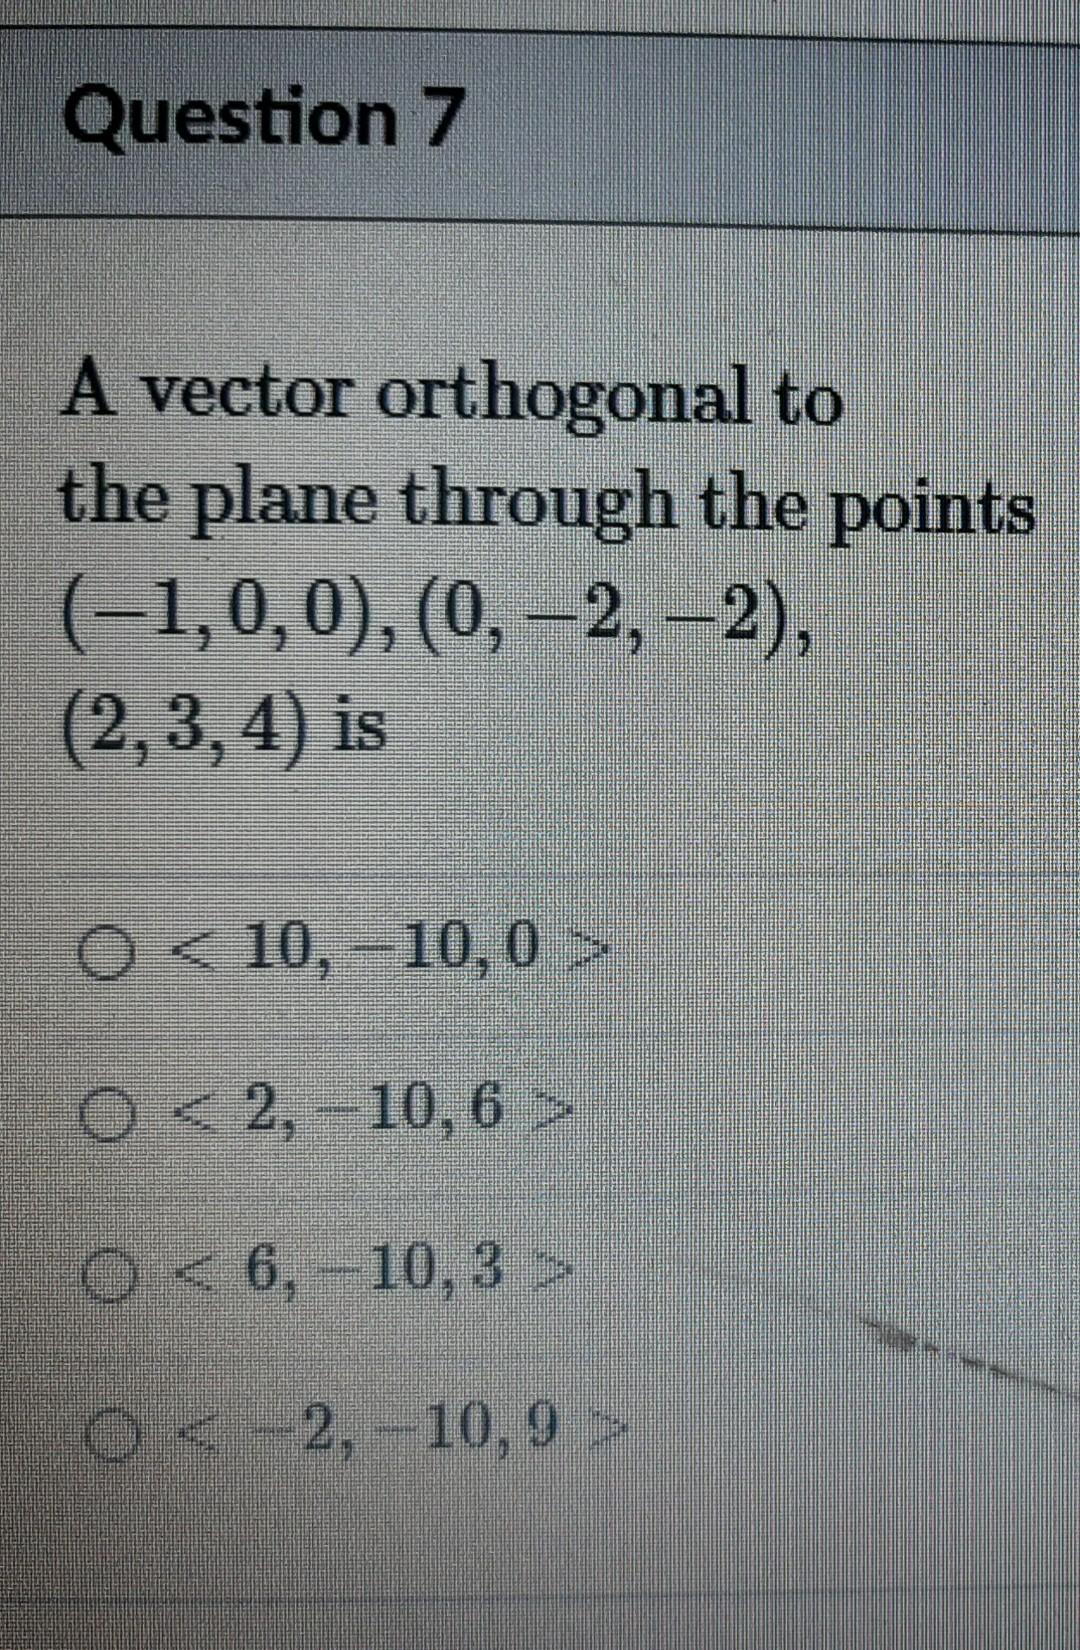 Question 7 A Vector Orthogonal To The Plane Through The Points 1 0 0 0 2 2 2 3 4 Is O 10 10 0 O 2 1